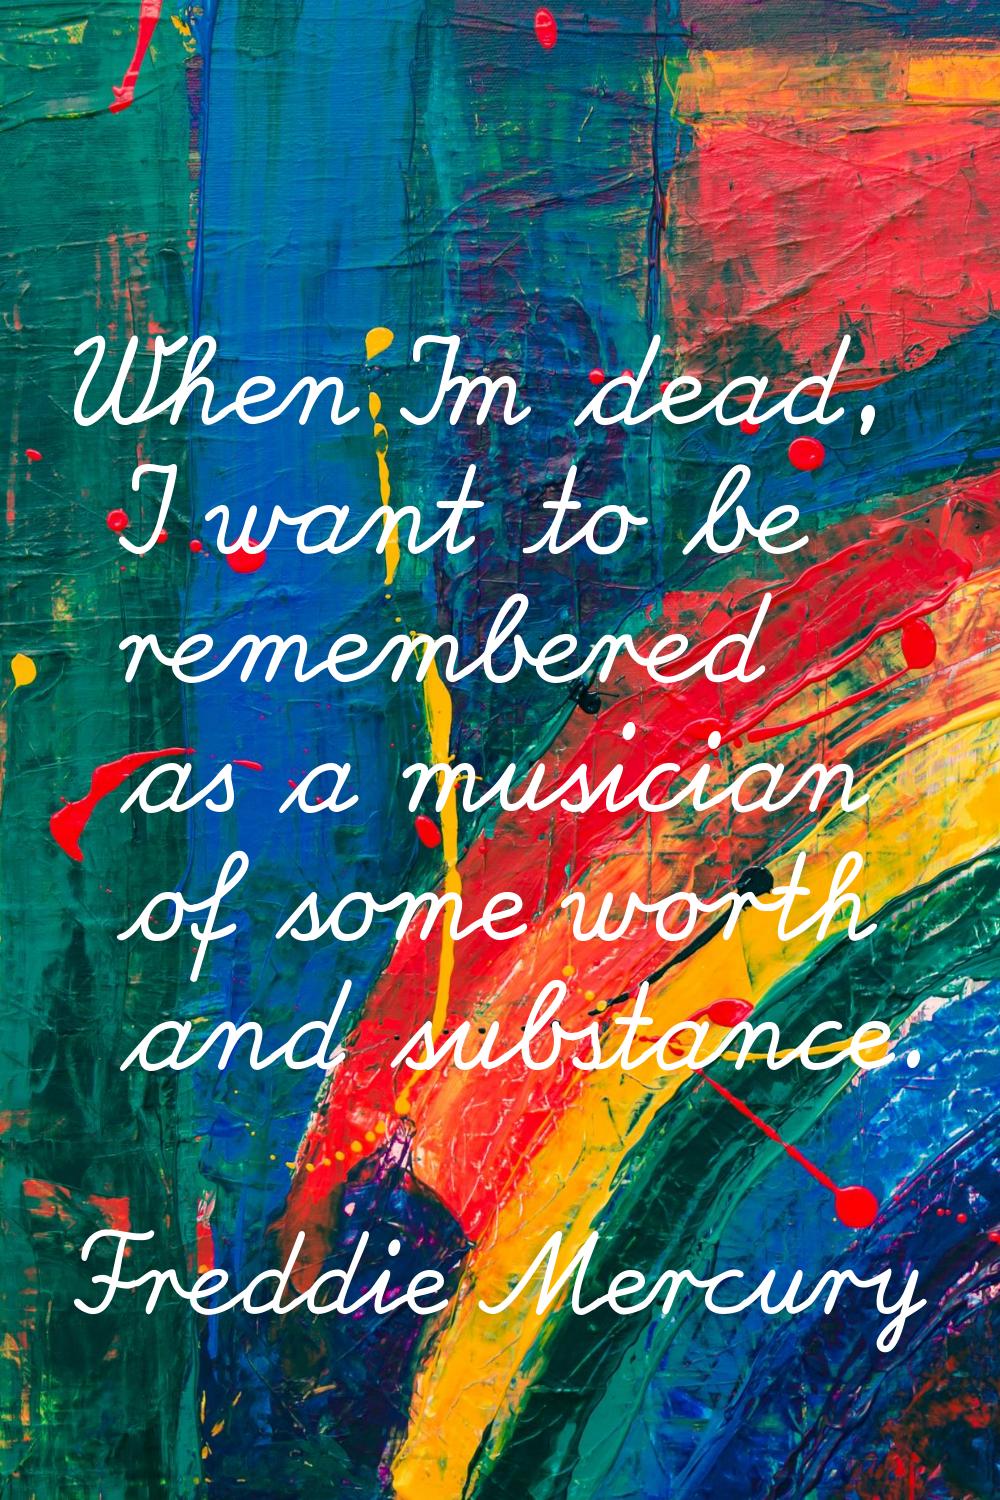 When I'm dead, I want to be remembered as a musician of some worth and substance.